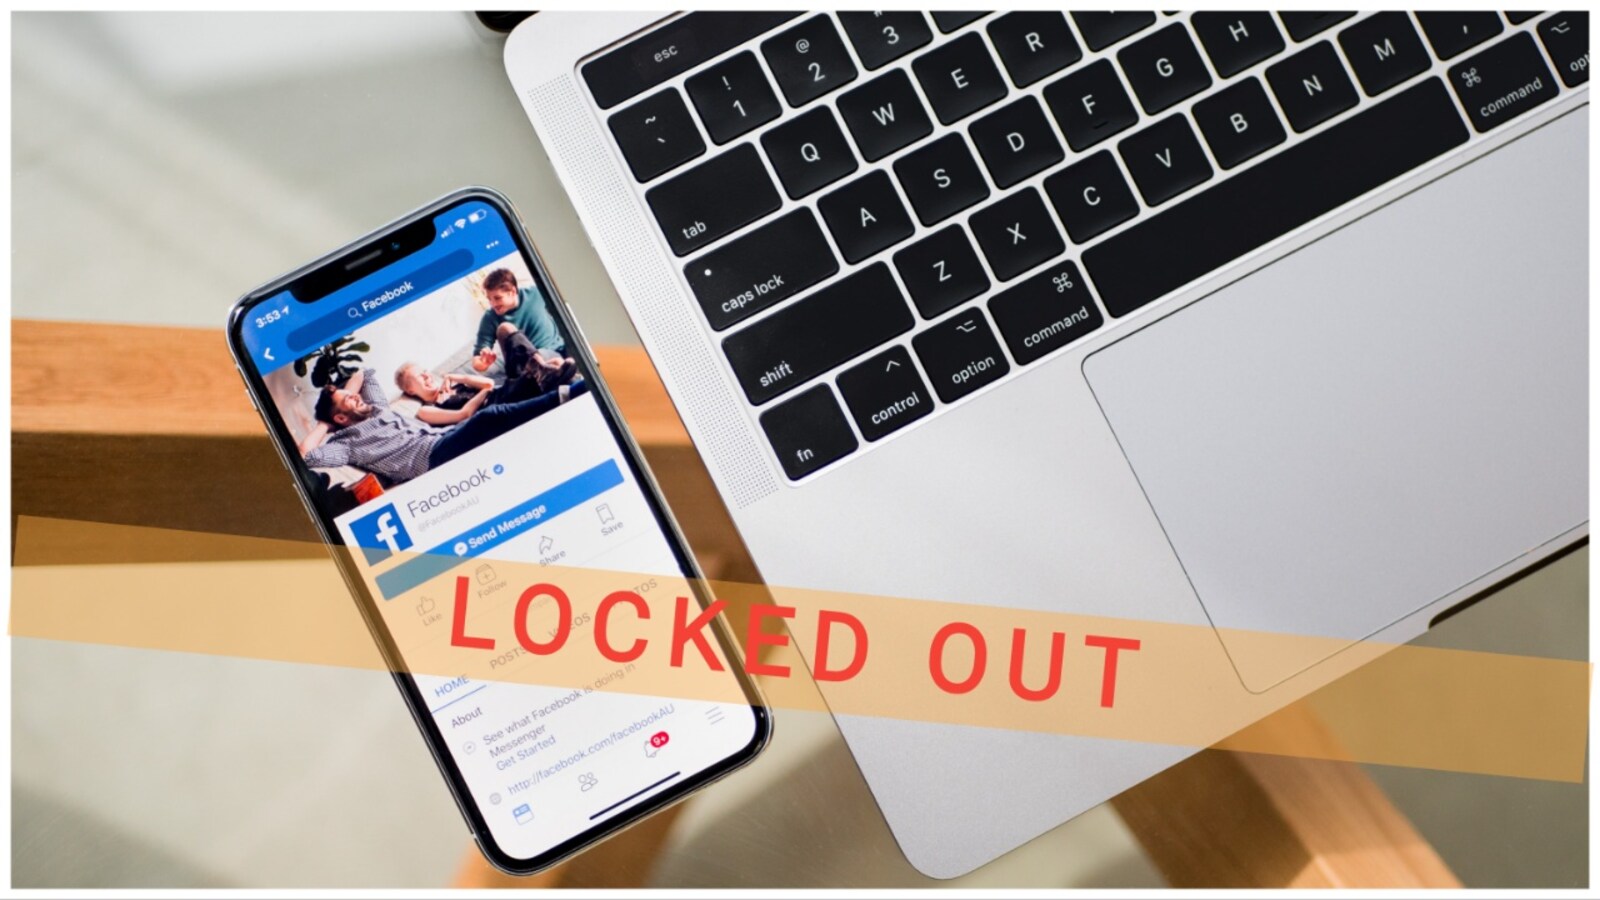 Man sues Facebook, gets Rs 41 lakh compensation for locking him out of his account